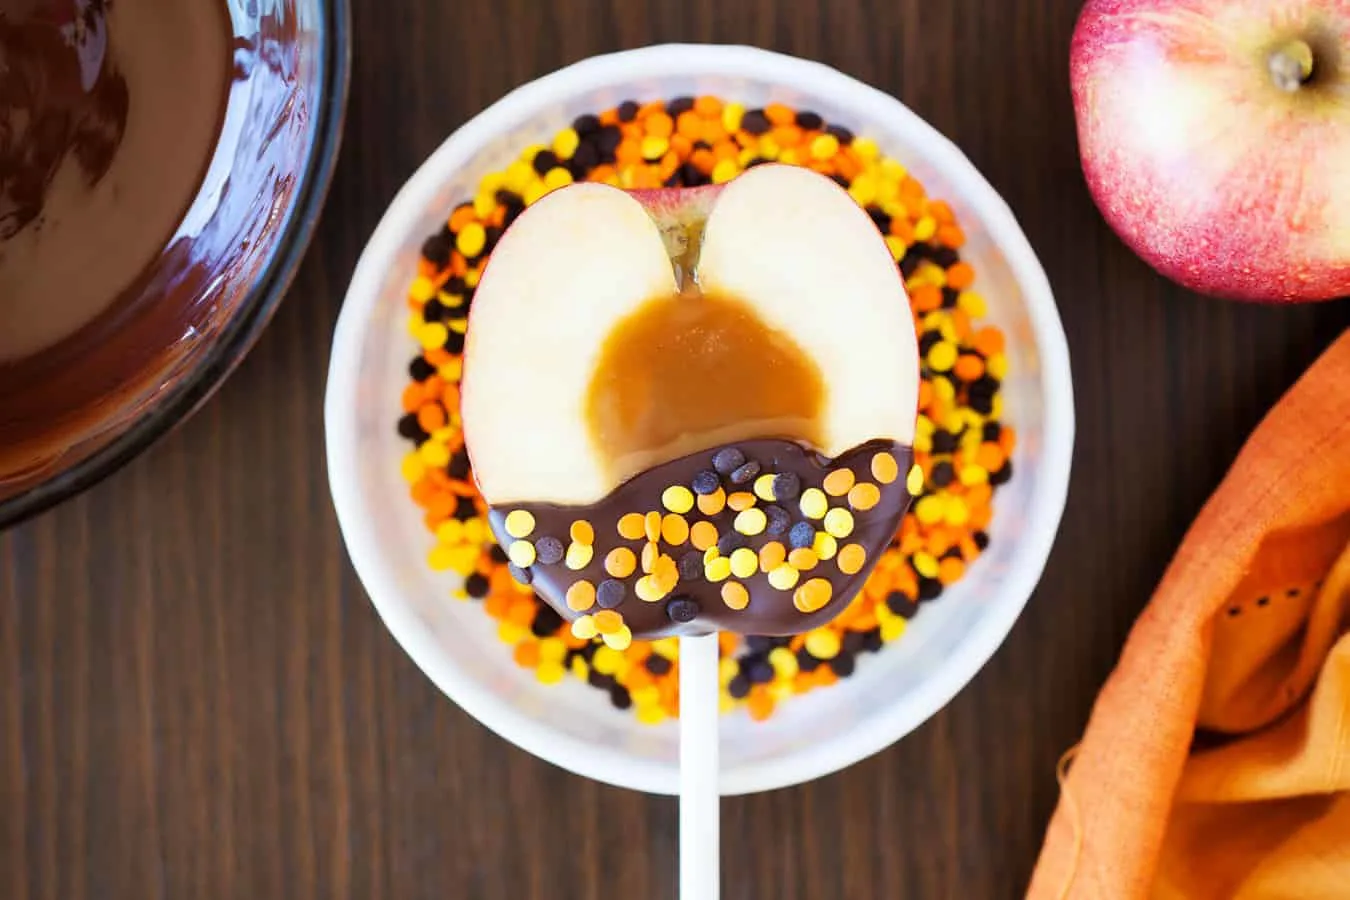 Learn how to make delicious candy apples on a stick. These caramel apple pops are perfect for fall and you can customize with the toppings of your choice!